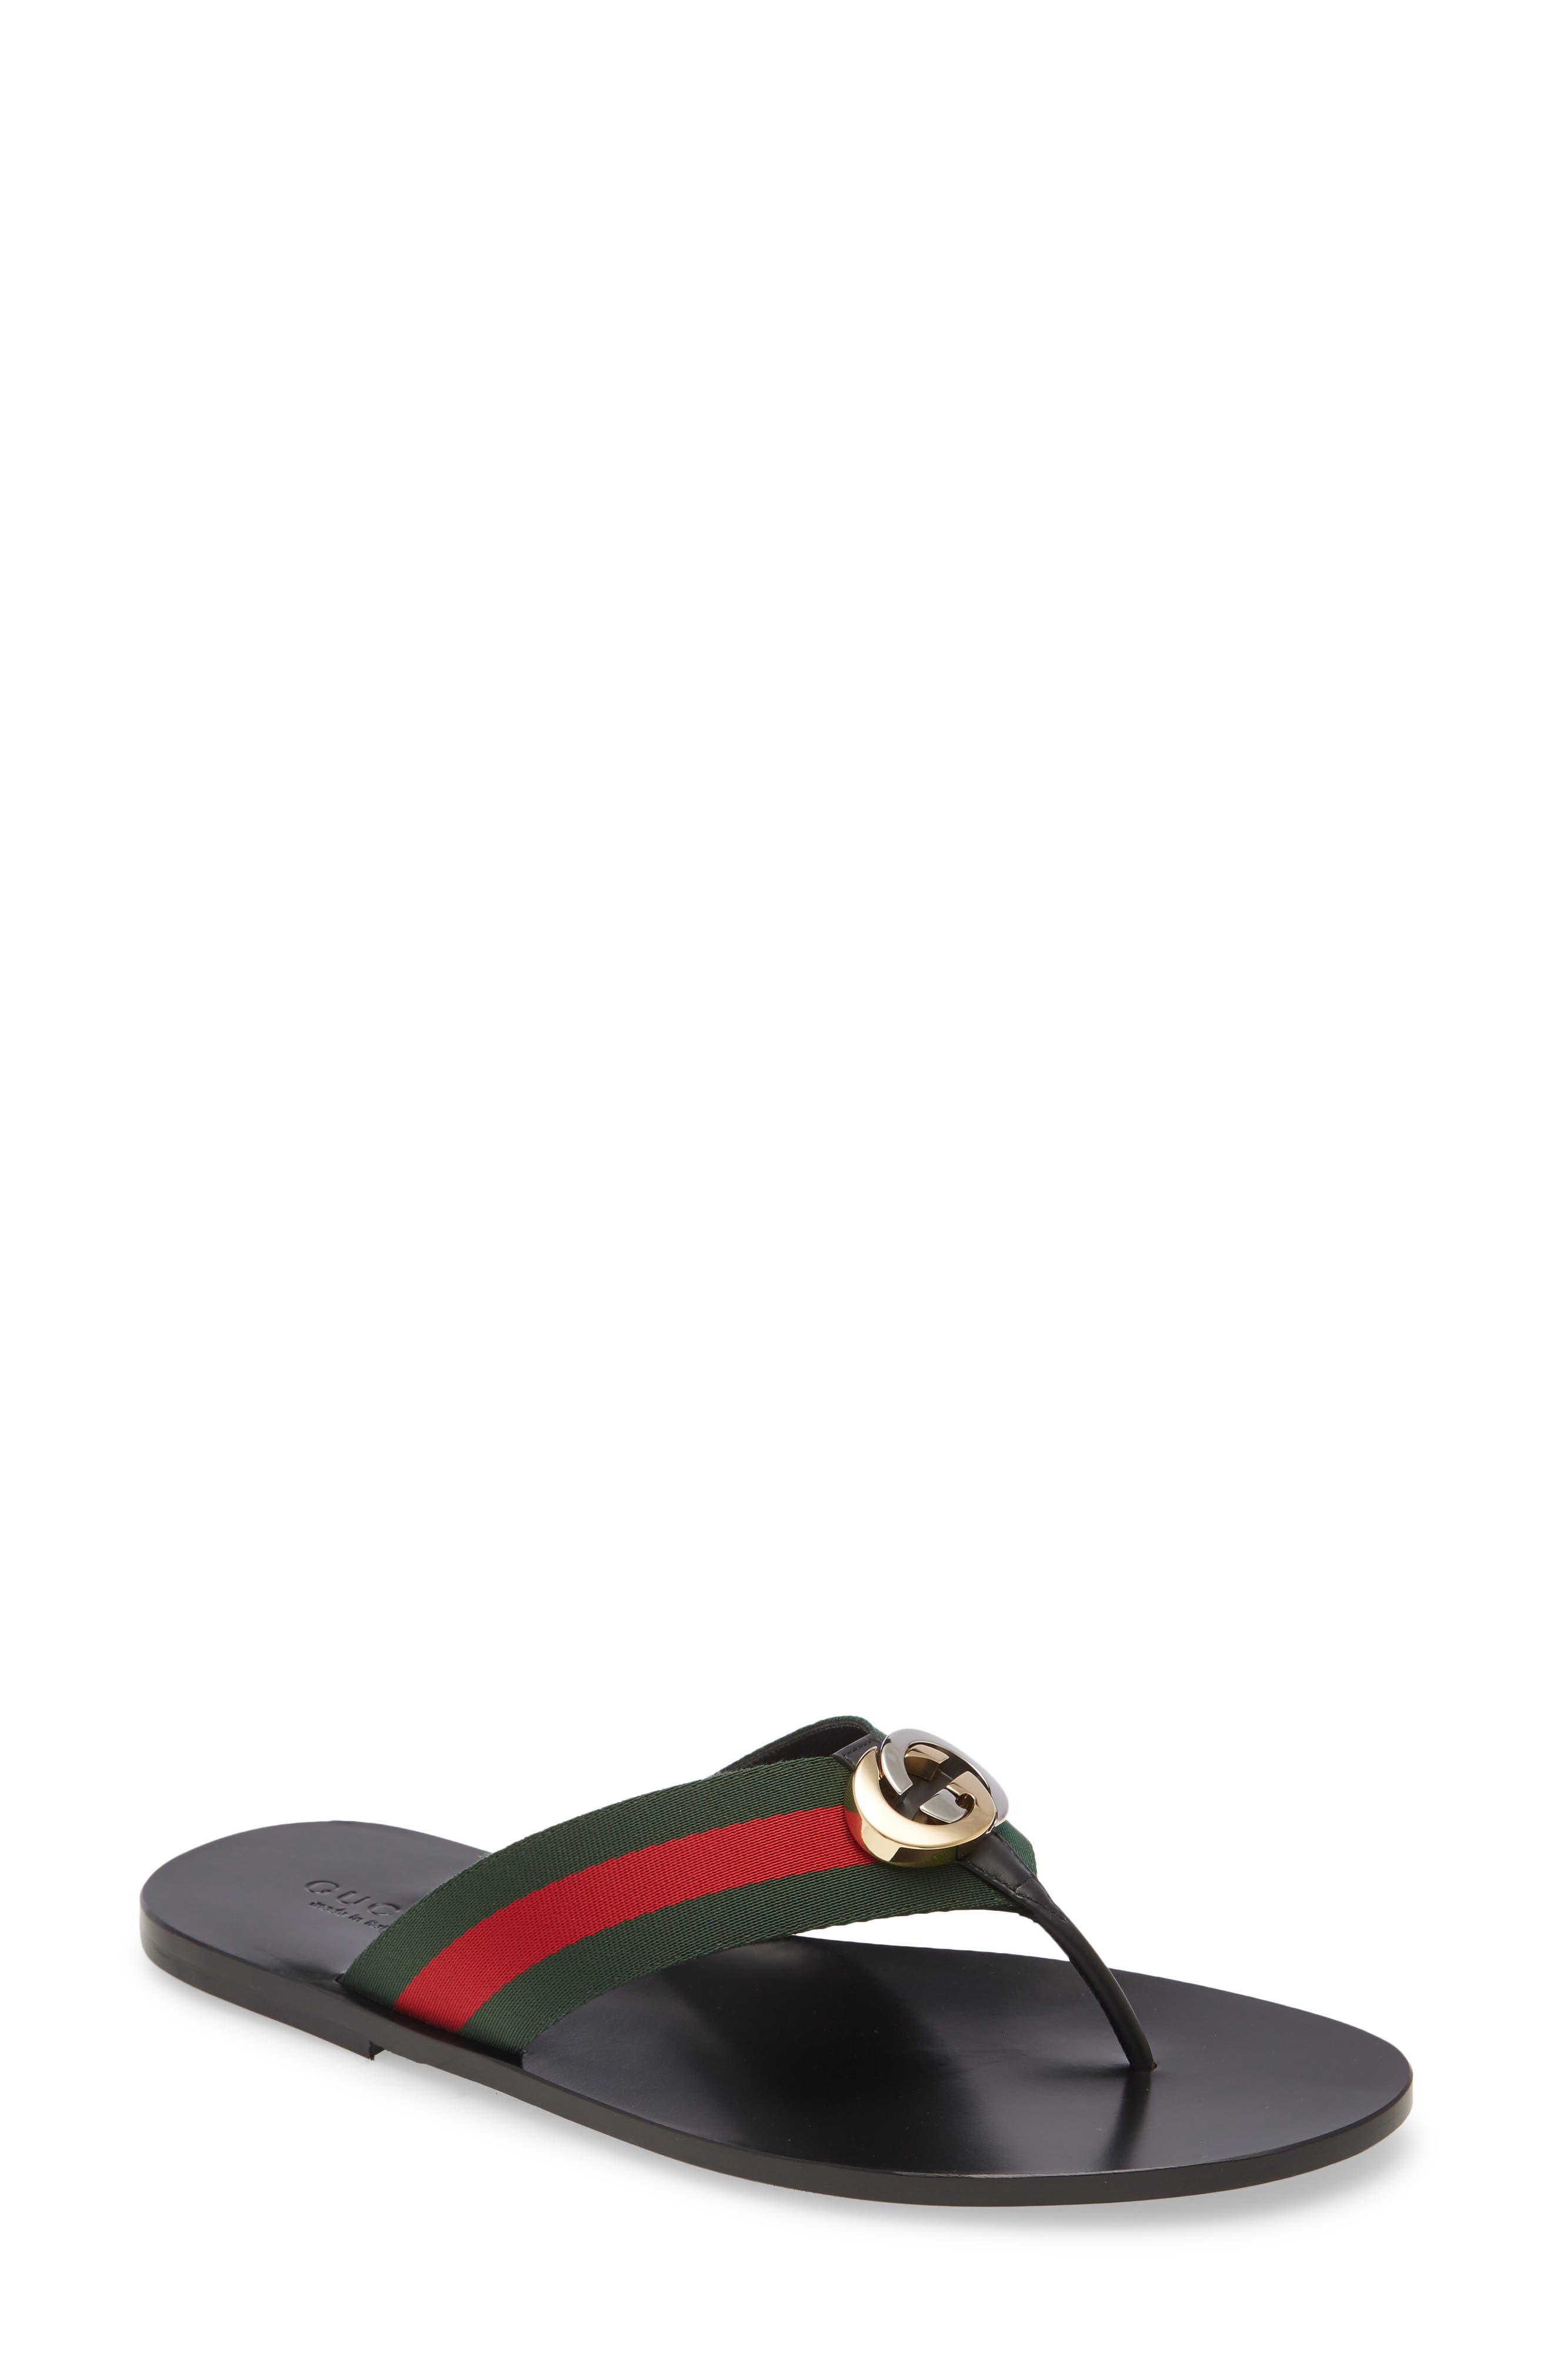 gucci male slippers